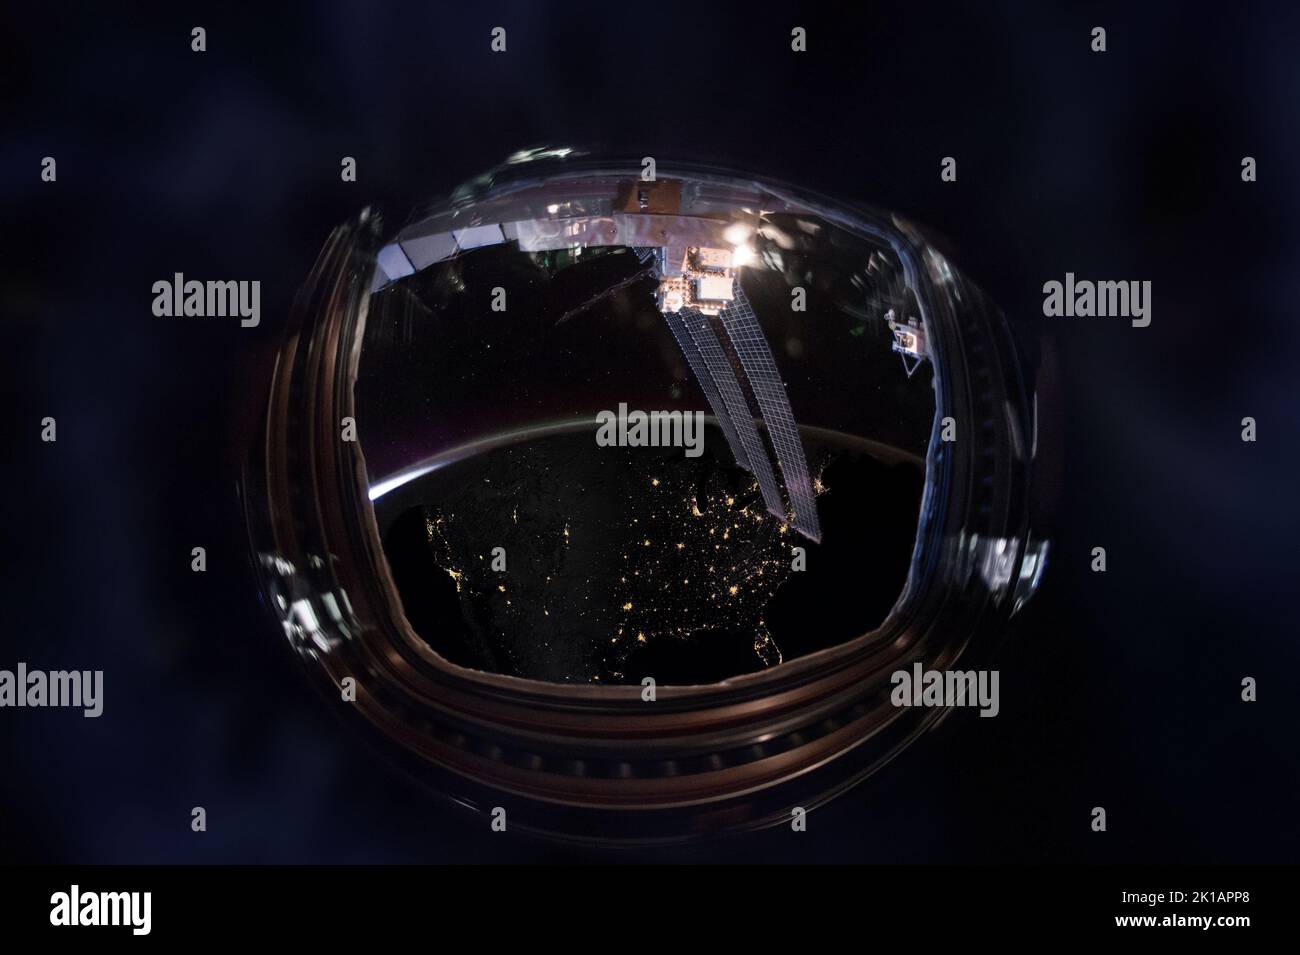 Porthole wide fisheye lens night view of the Earth with United States map of illuminated cities. Elements of this image furnished by NASA. Stock Photo